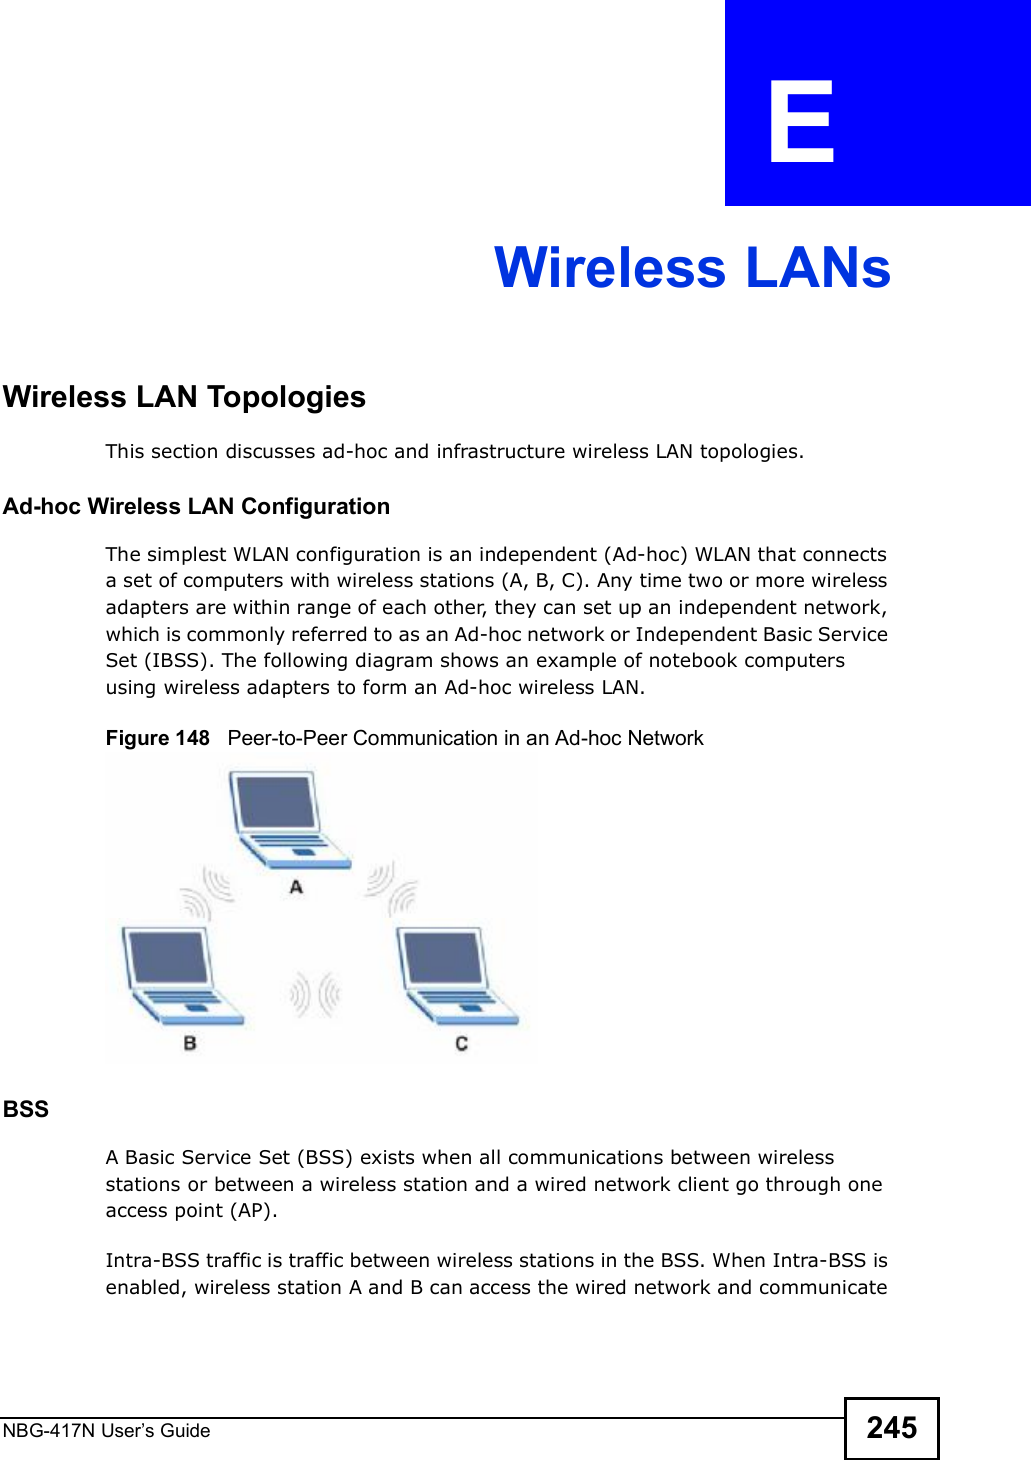 NBG-417N User s Guide 245APPENDIX  E Wireless LANsWireless LAN TopologiesThis section discusses ad-hoc and infrastructure wireless LAN topologies.Ad-hoc Wireless LAN ConfigurationThe simplest WLAN configuration is an independent (Ad-hoc) WLAN that connects a set of computers with wireless stations (A, B, C). Any time two or more wireless adapters are within range of each other, they can set up an independent network, which is commonly referred to as an Ad-hoc network or Independent Basic Service Set (IBSS). The following diagram shows an example of notebook computers using wireless adapters to form an Ad-hoc wireless LAN. Figure 148   Peer-to-Peer Communication in an Ad-hoc NetworkBSSA Basic Service Set (BSS) exists when all communications between wireless stations or between a wireless station and a wired network client go through one access point (AP). Intra-BSS traffic is traffic between wireless stations in the BSS. When Intra-BSS is enabled, wireless station A and B can access the wired network and communicate 